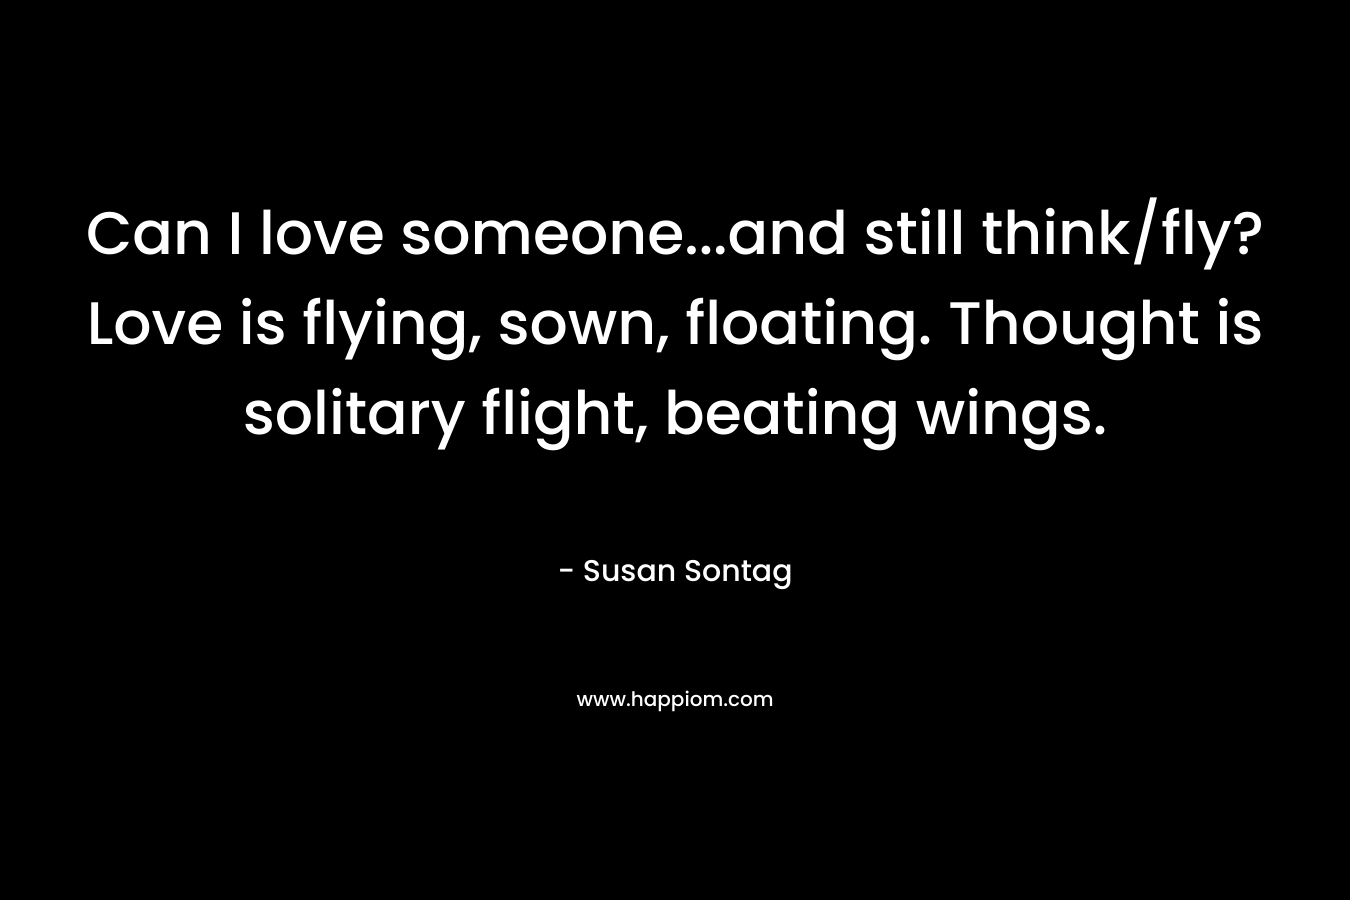 Can I love someone…and still think/fly? Love is flying, sown, floating. Thought is solitary flight, beating wings. – Susan Sontag